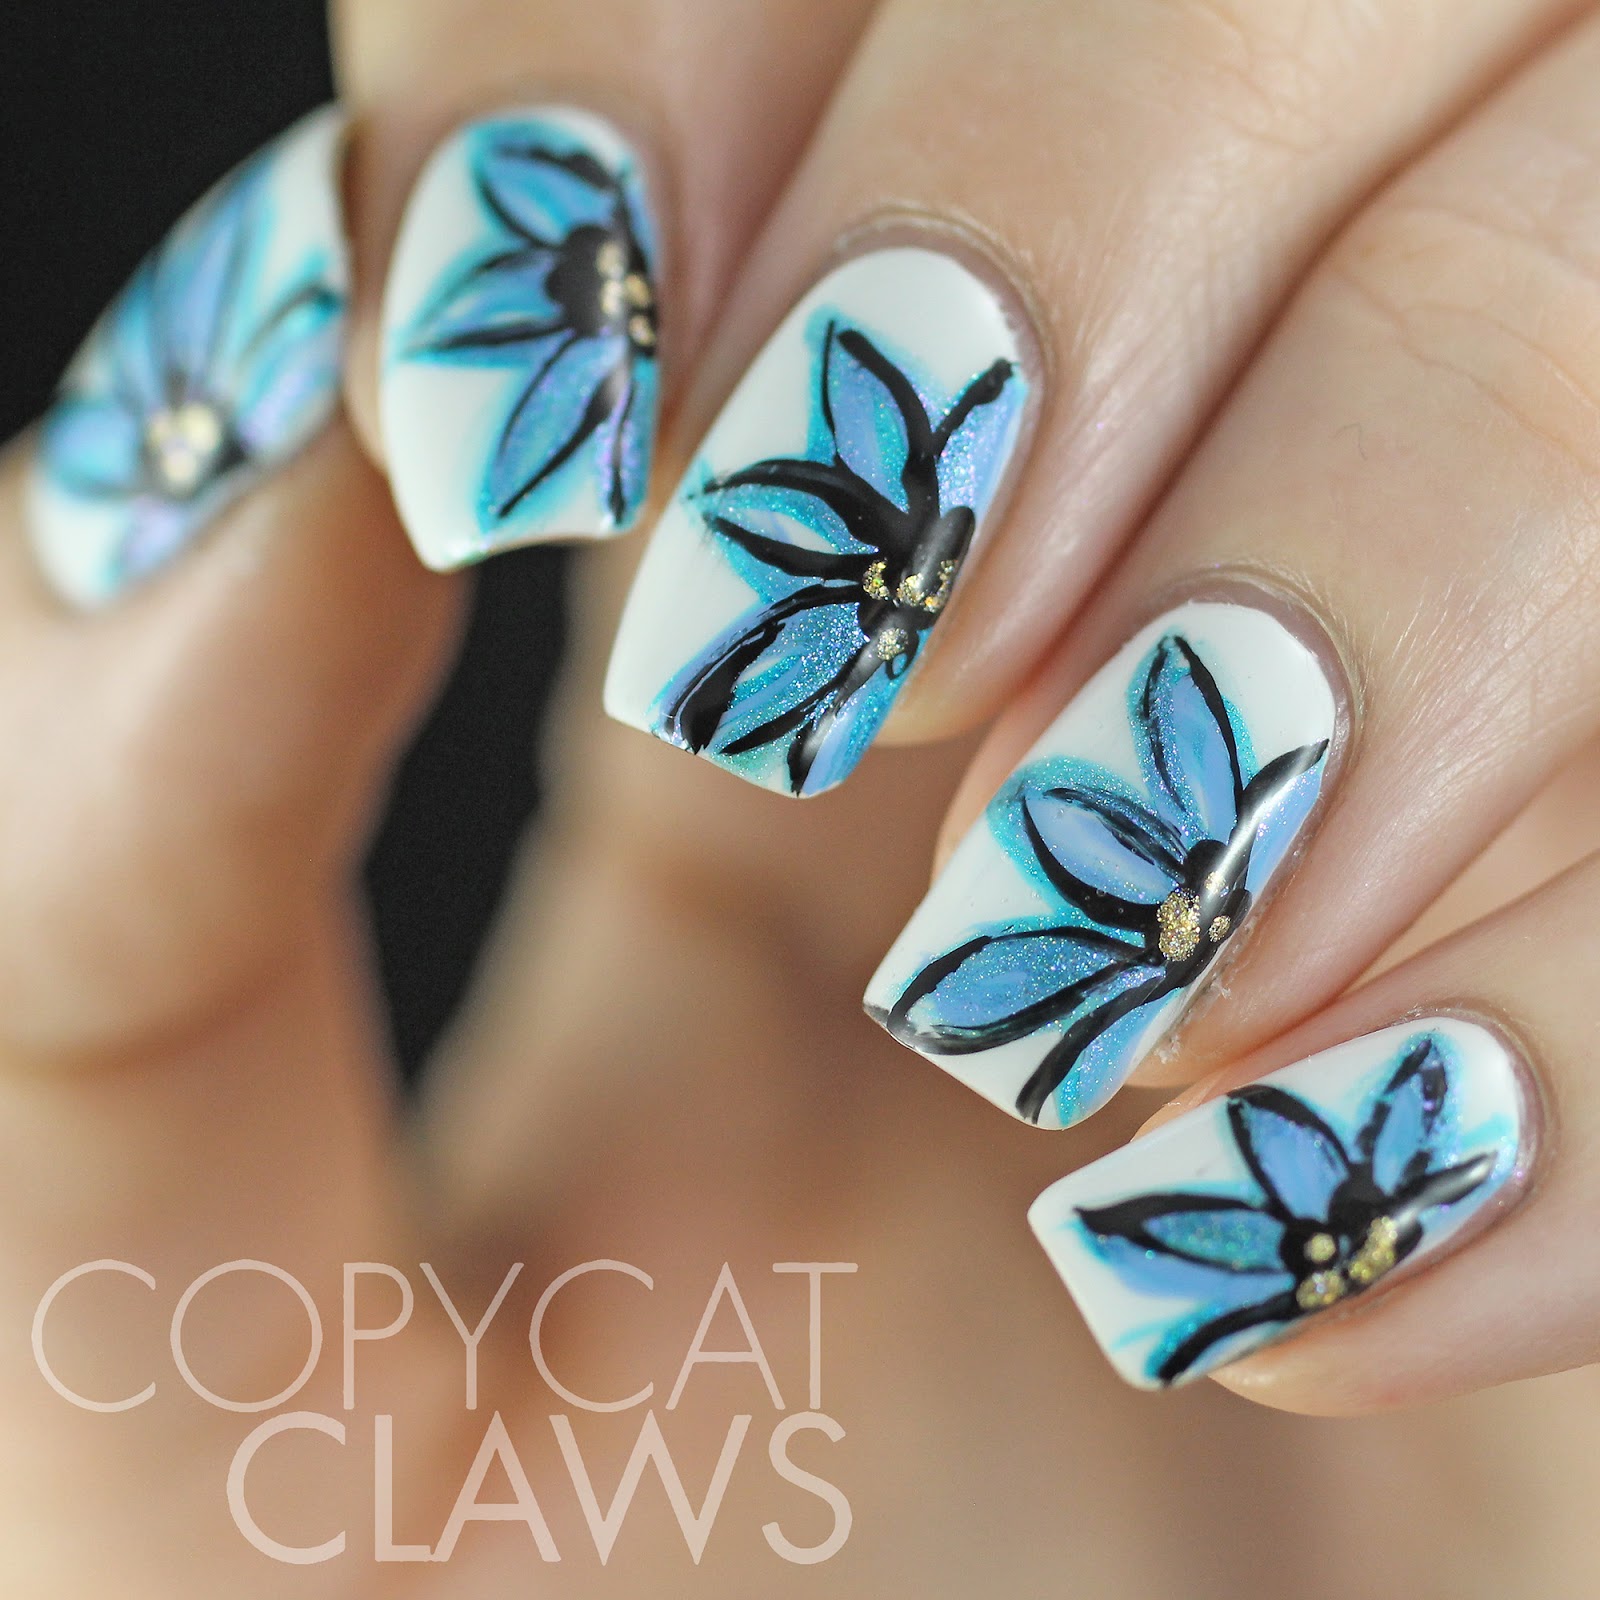 Copycat Claws: Freehand Blue Flower Nail Art